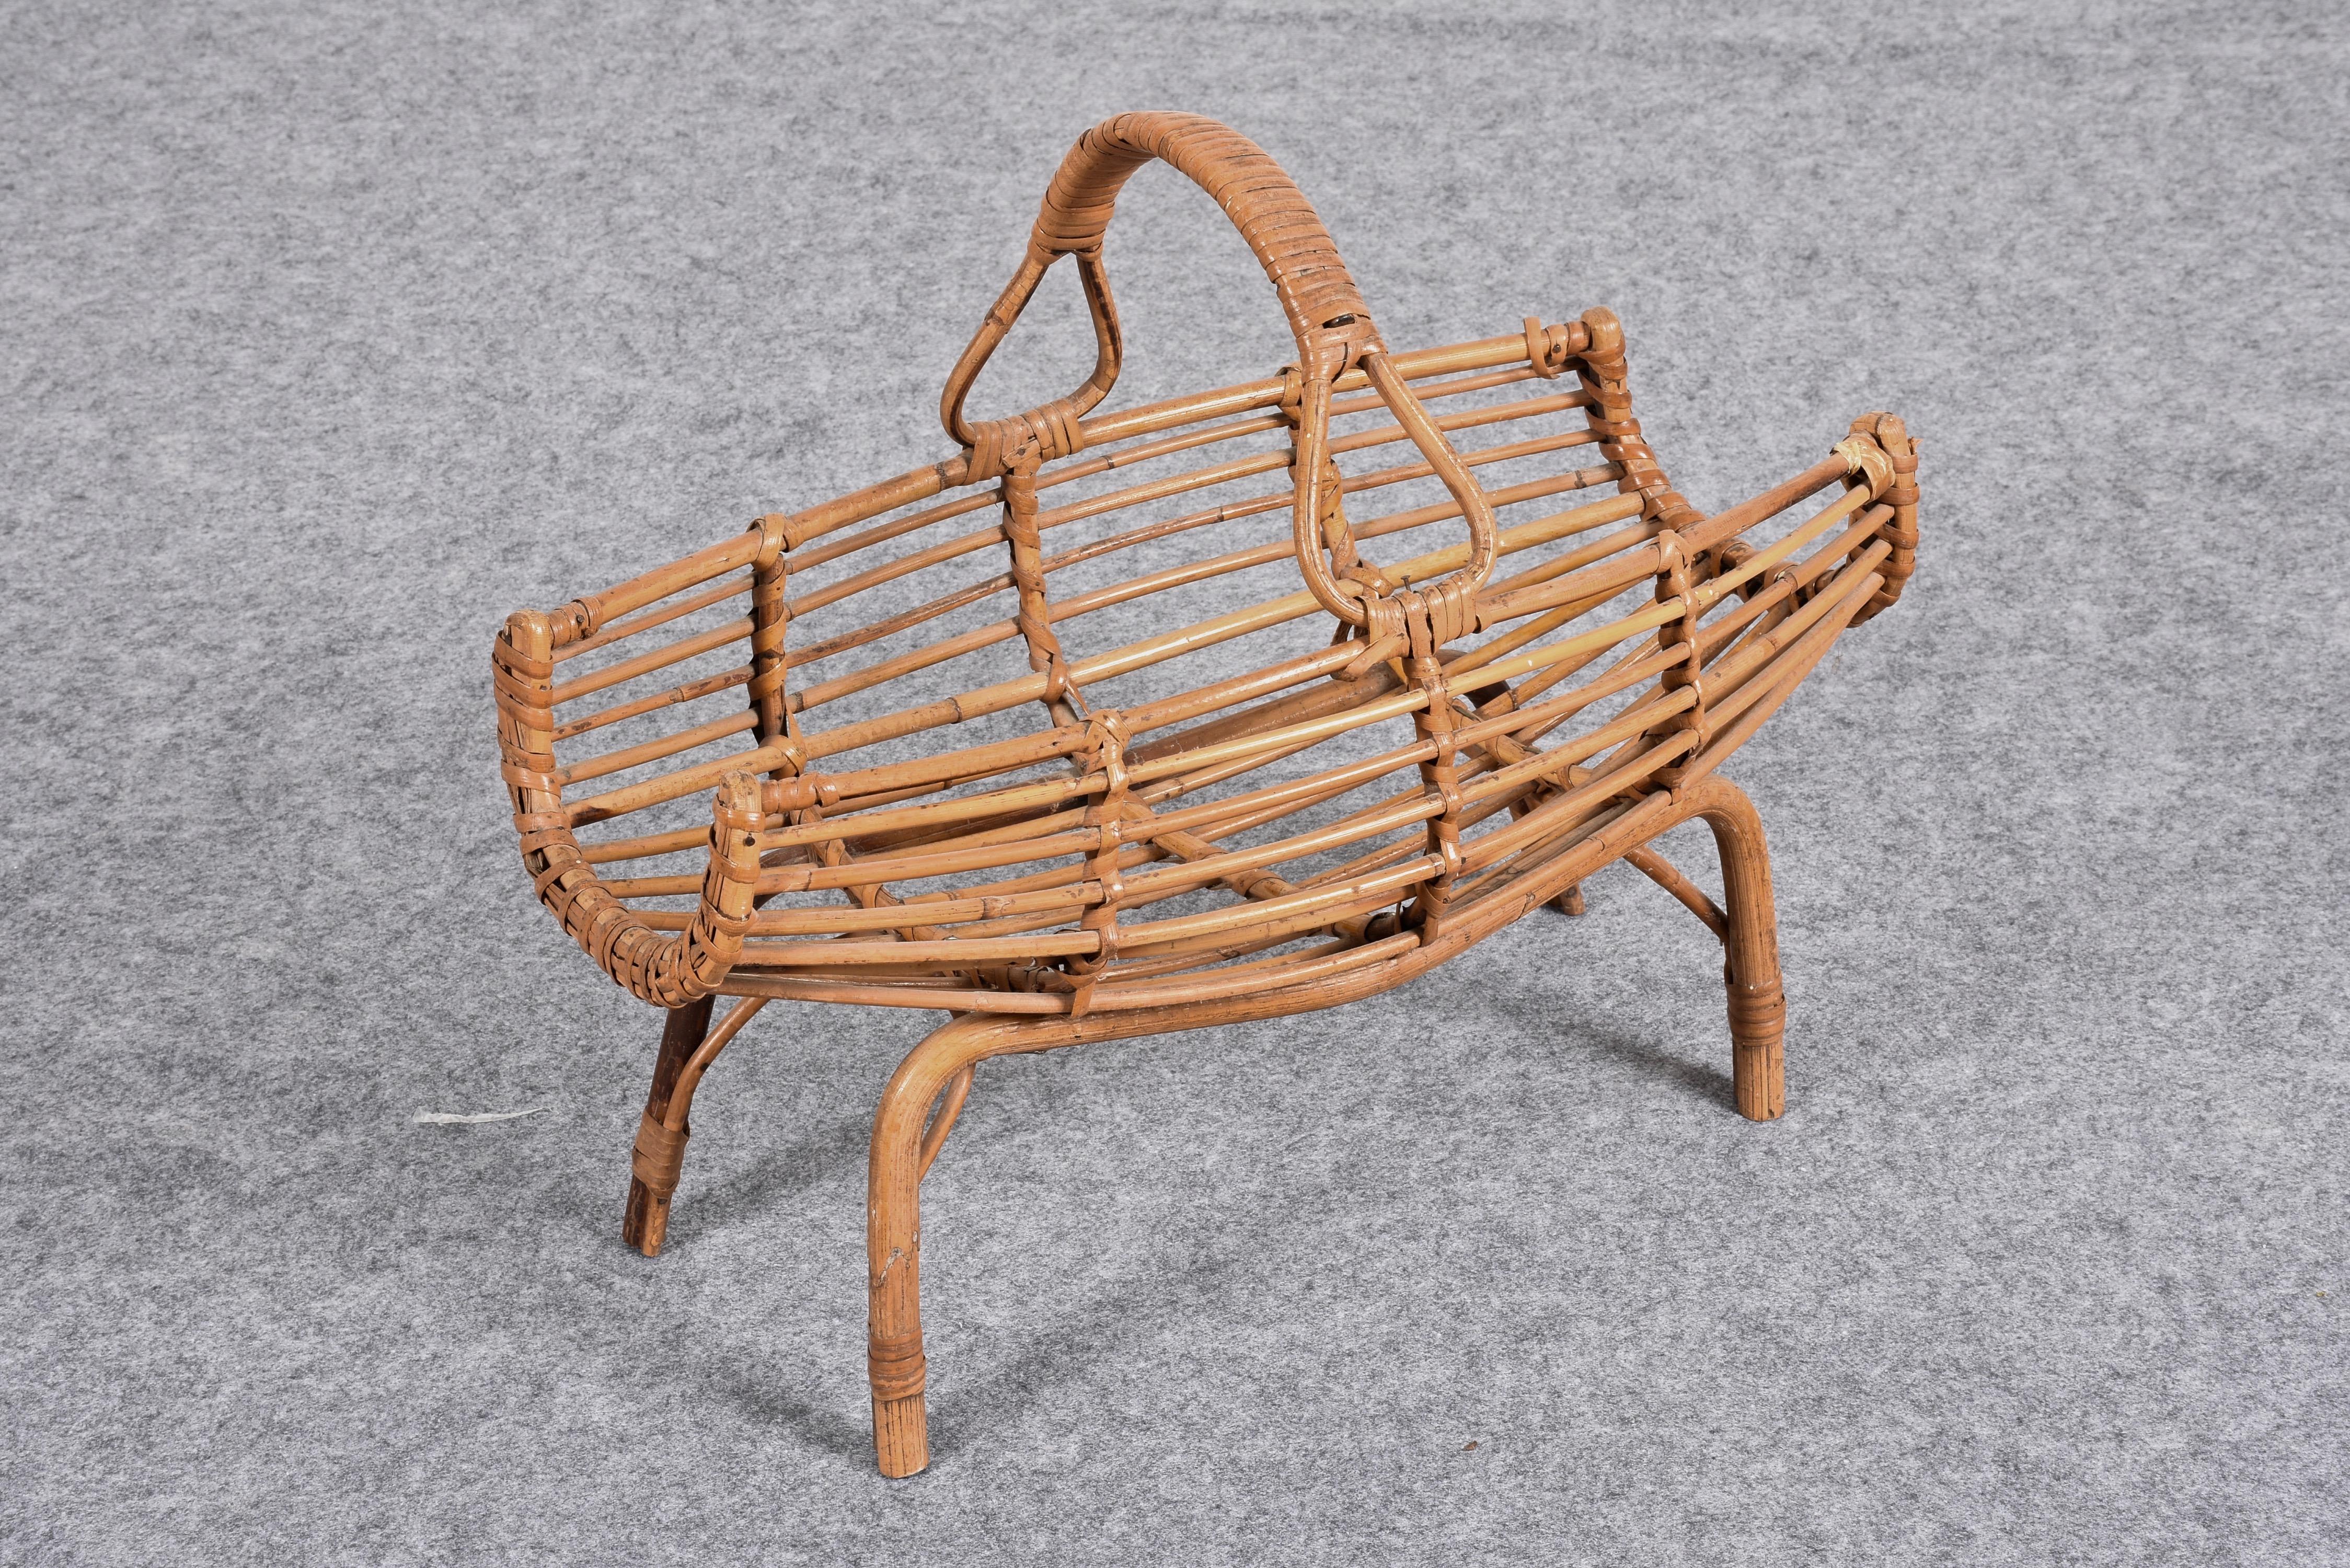 Midcentury French Riviera Bamboo and Rattan Italian Magazine Rack, 1960s For Sale 2